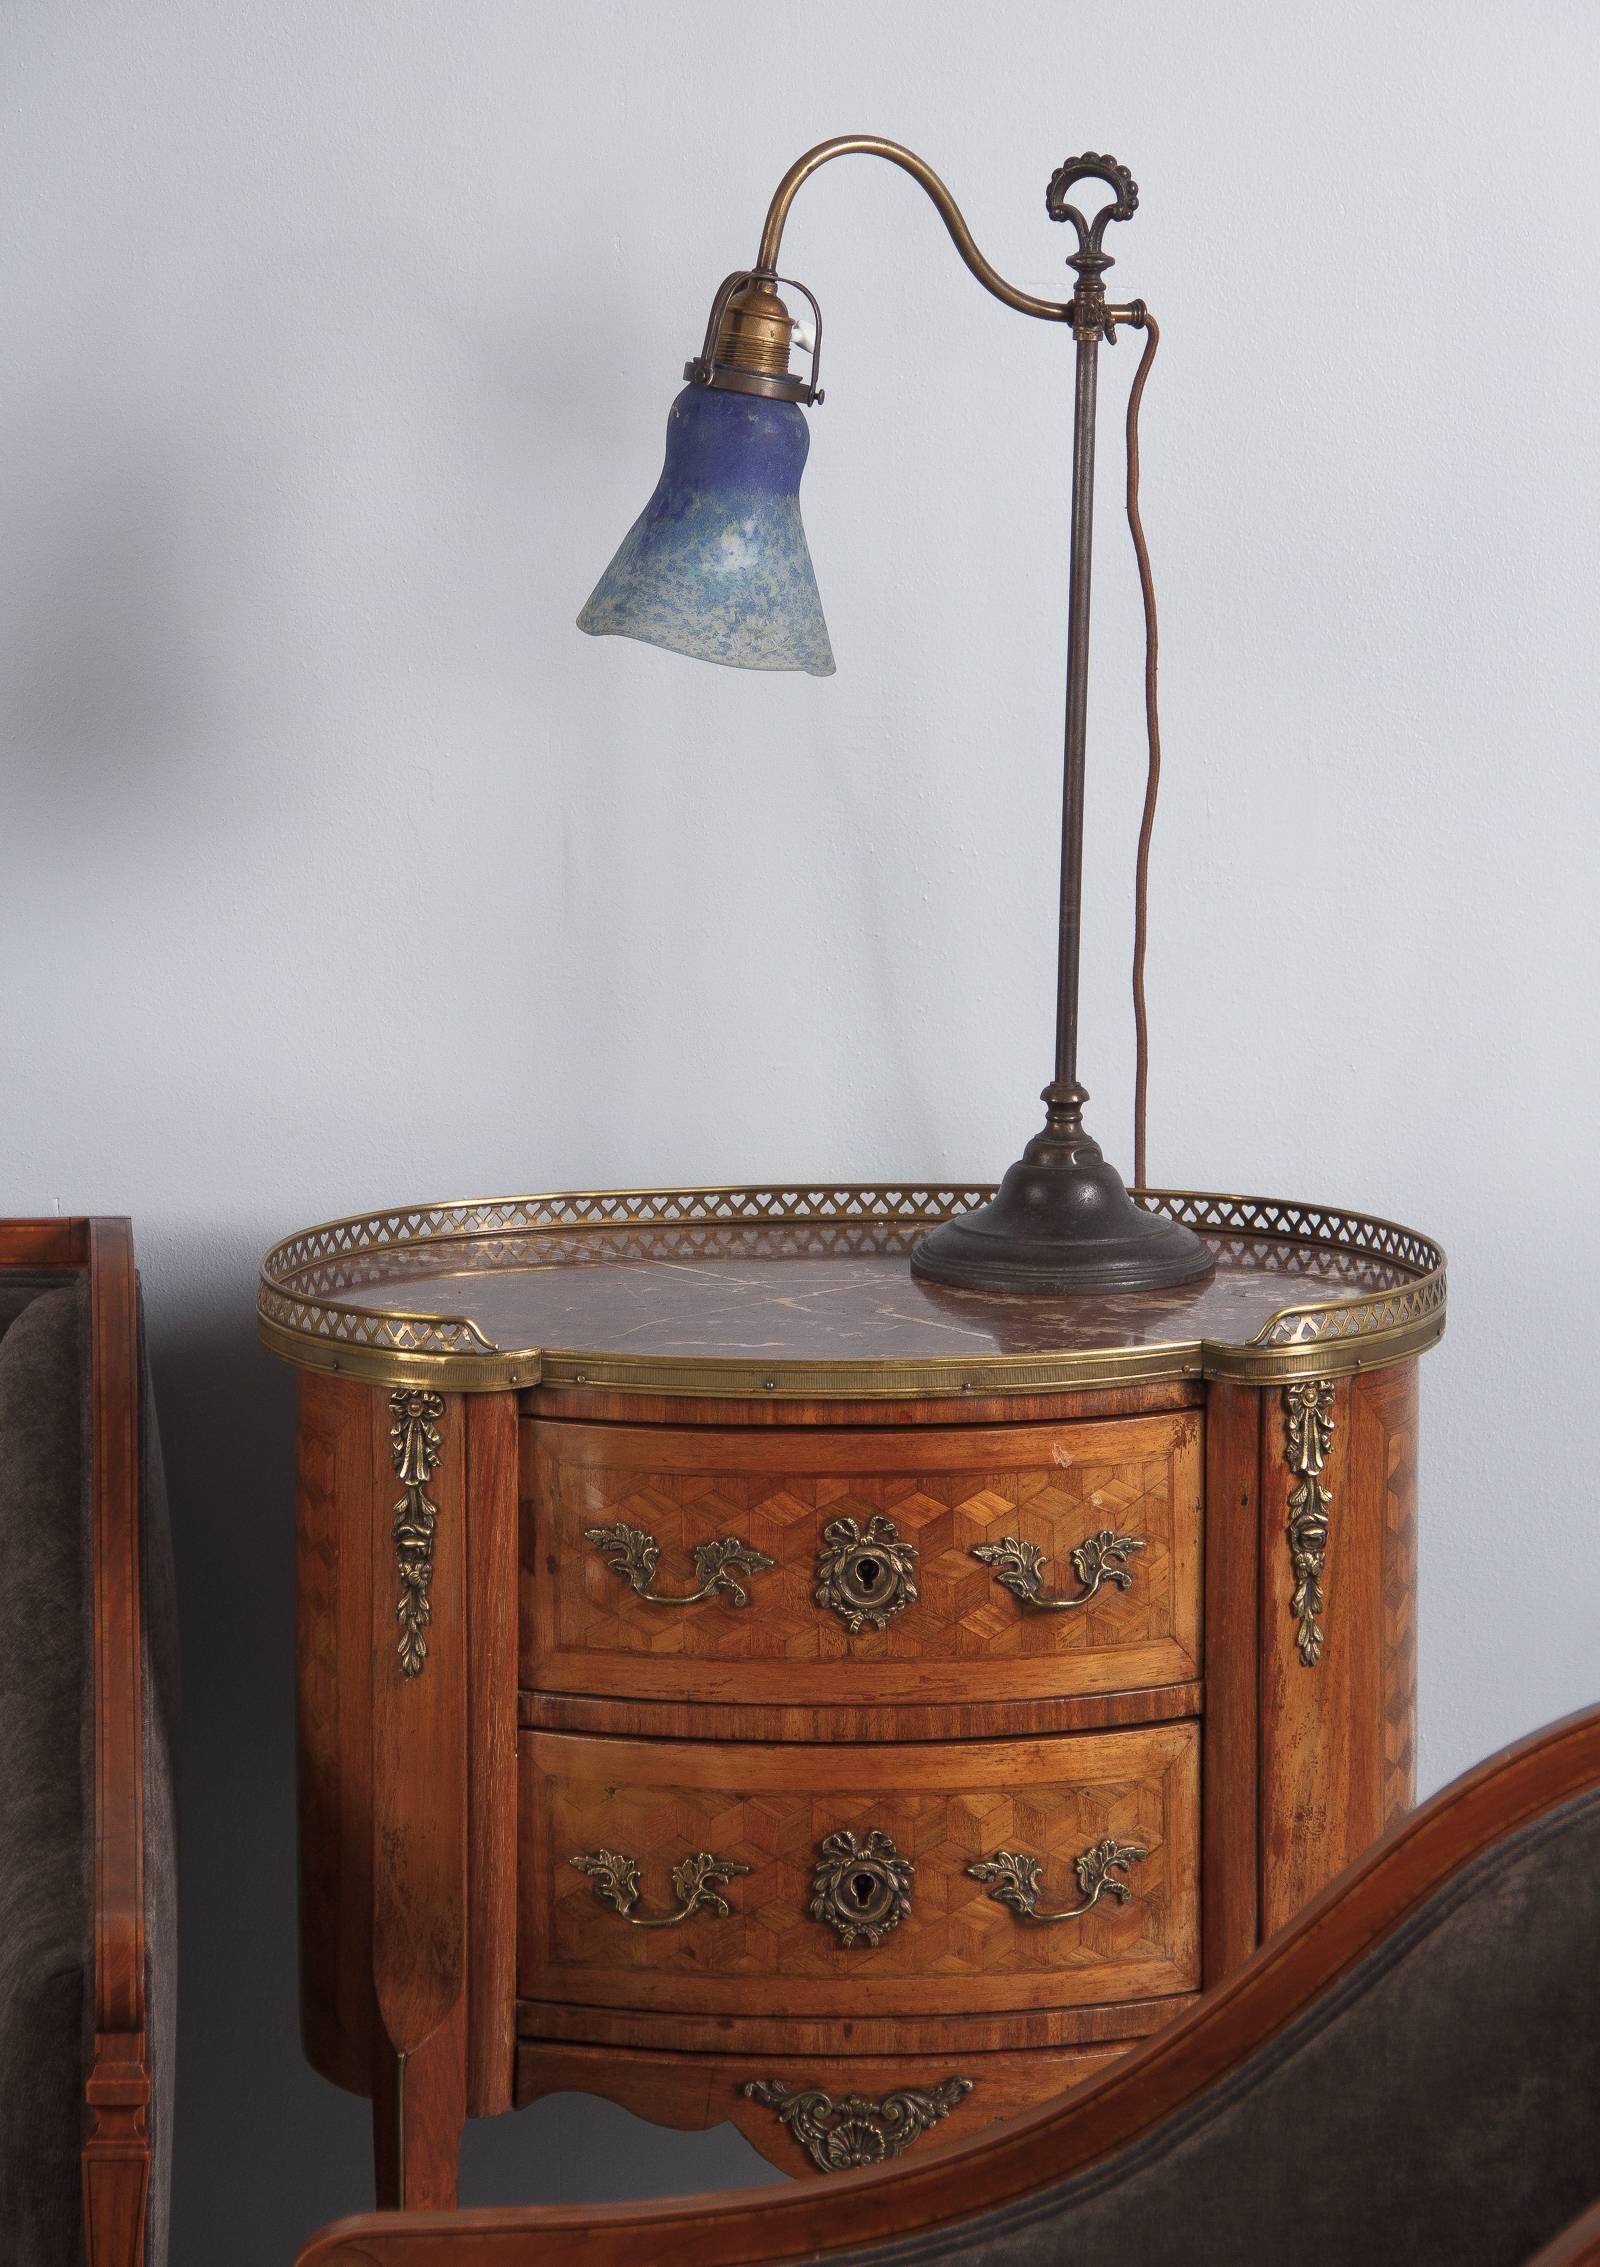 An elegant Art Nouveau desk lamp with signed art glass shade by Daum, circa 1900. The iron stand has a molded base and an arched and beaded finial. A curved brass arm can be adjusted to chosen height with a stylized Fleur de Lis handle. The fixture